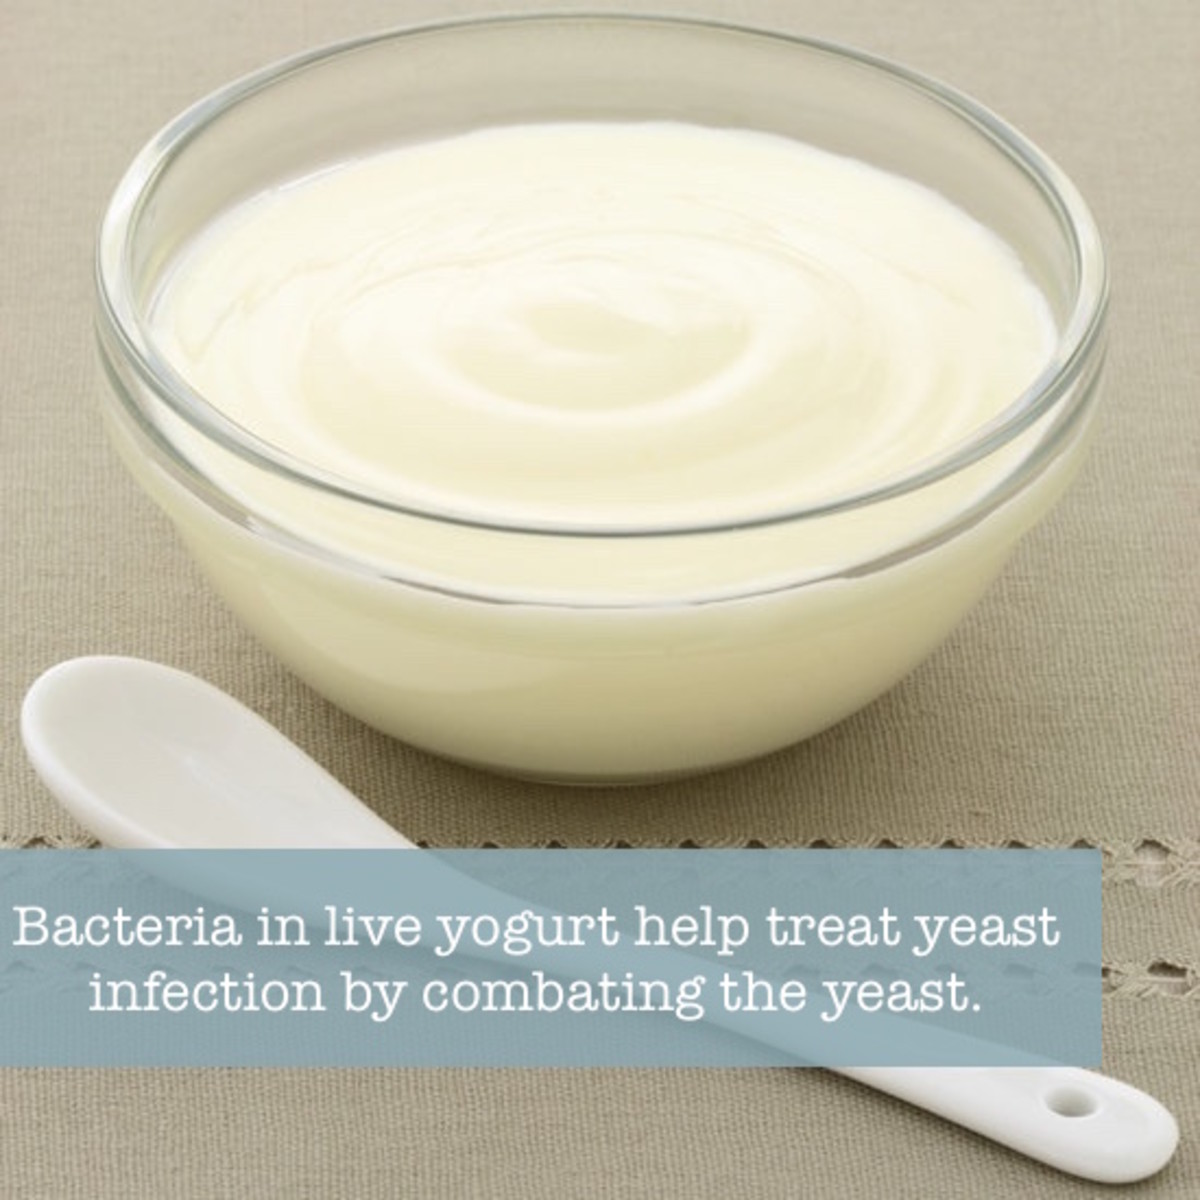 Bacteria in live yogurt help treat yeast infection by combating the yeast.